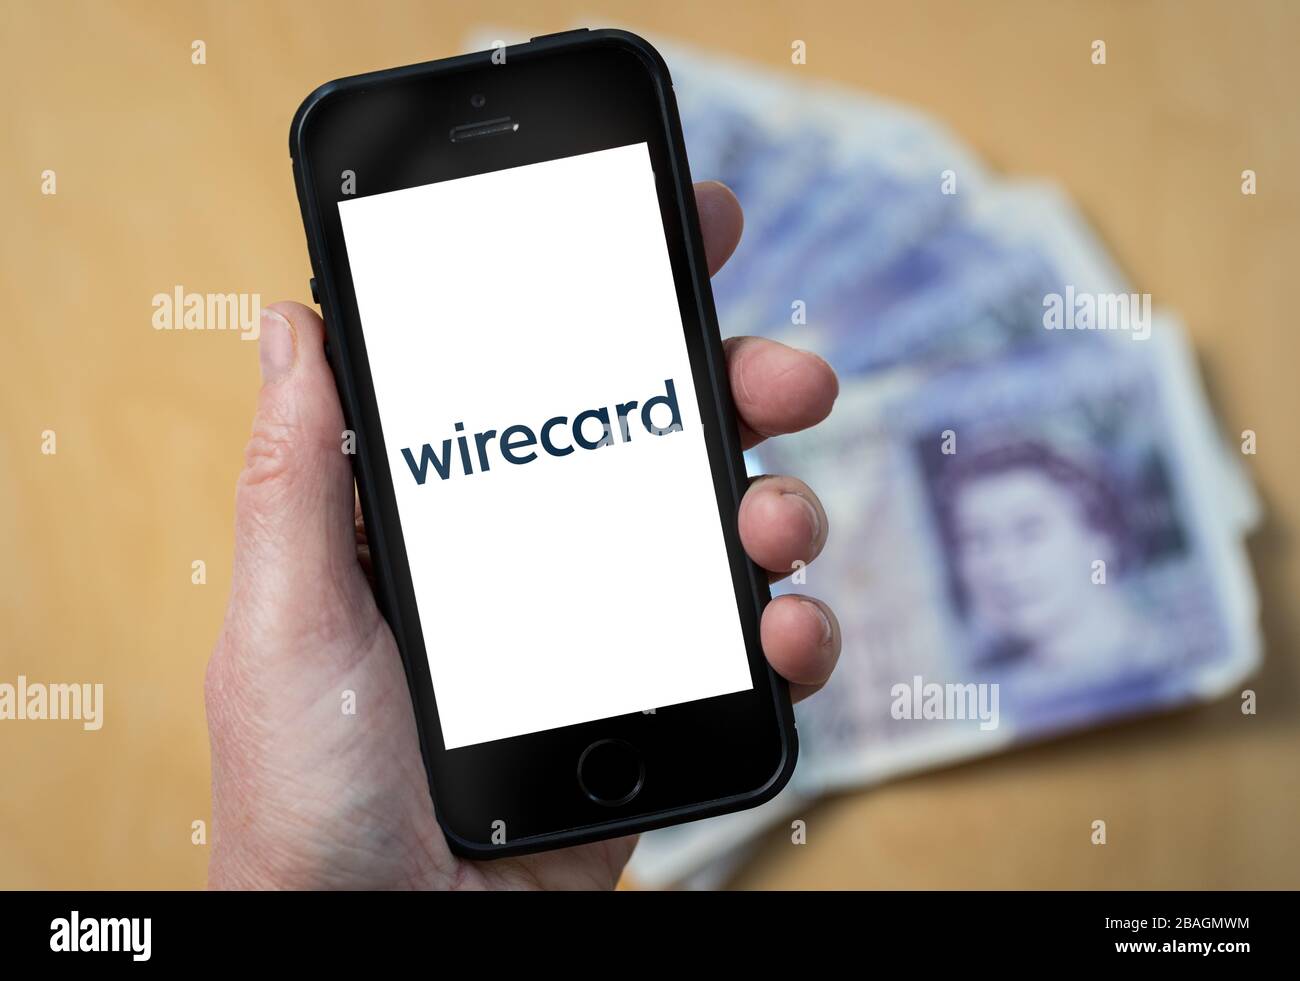 A woman looking at the Wirecard financial services company logo on a mobile phone. (editorial Use Only) Stock Photo